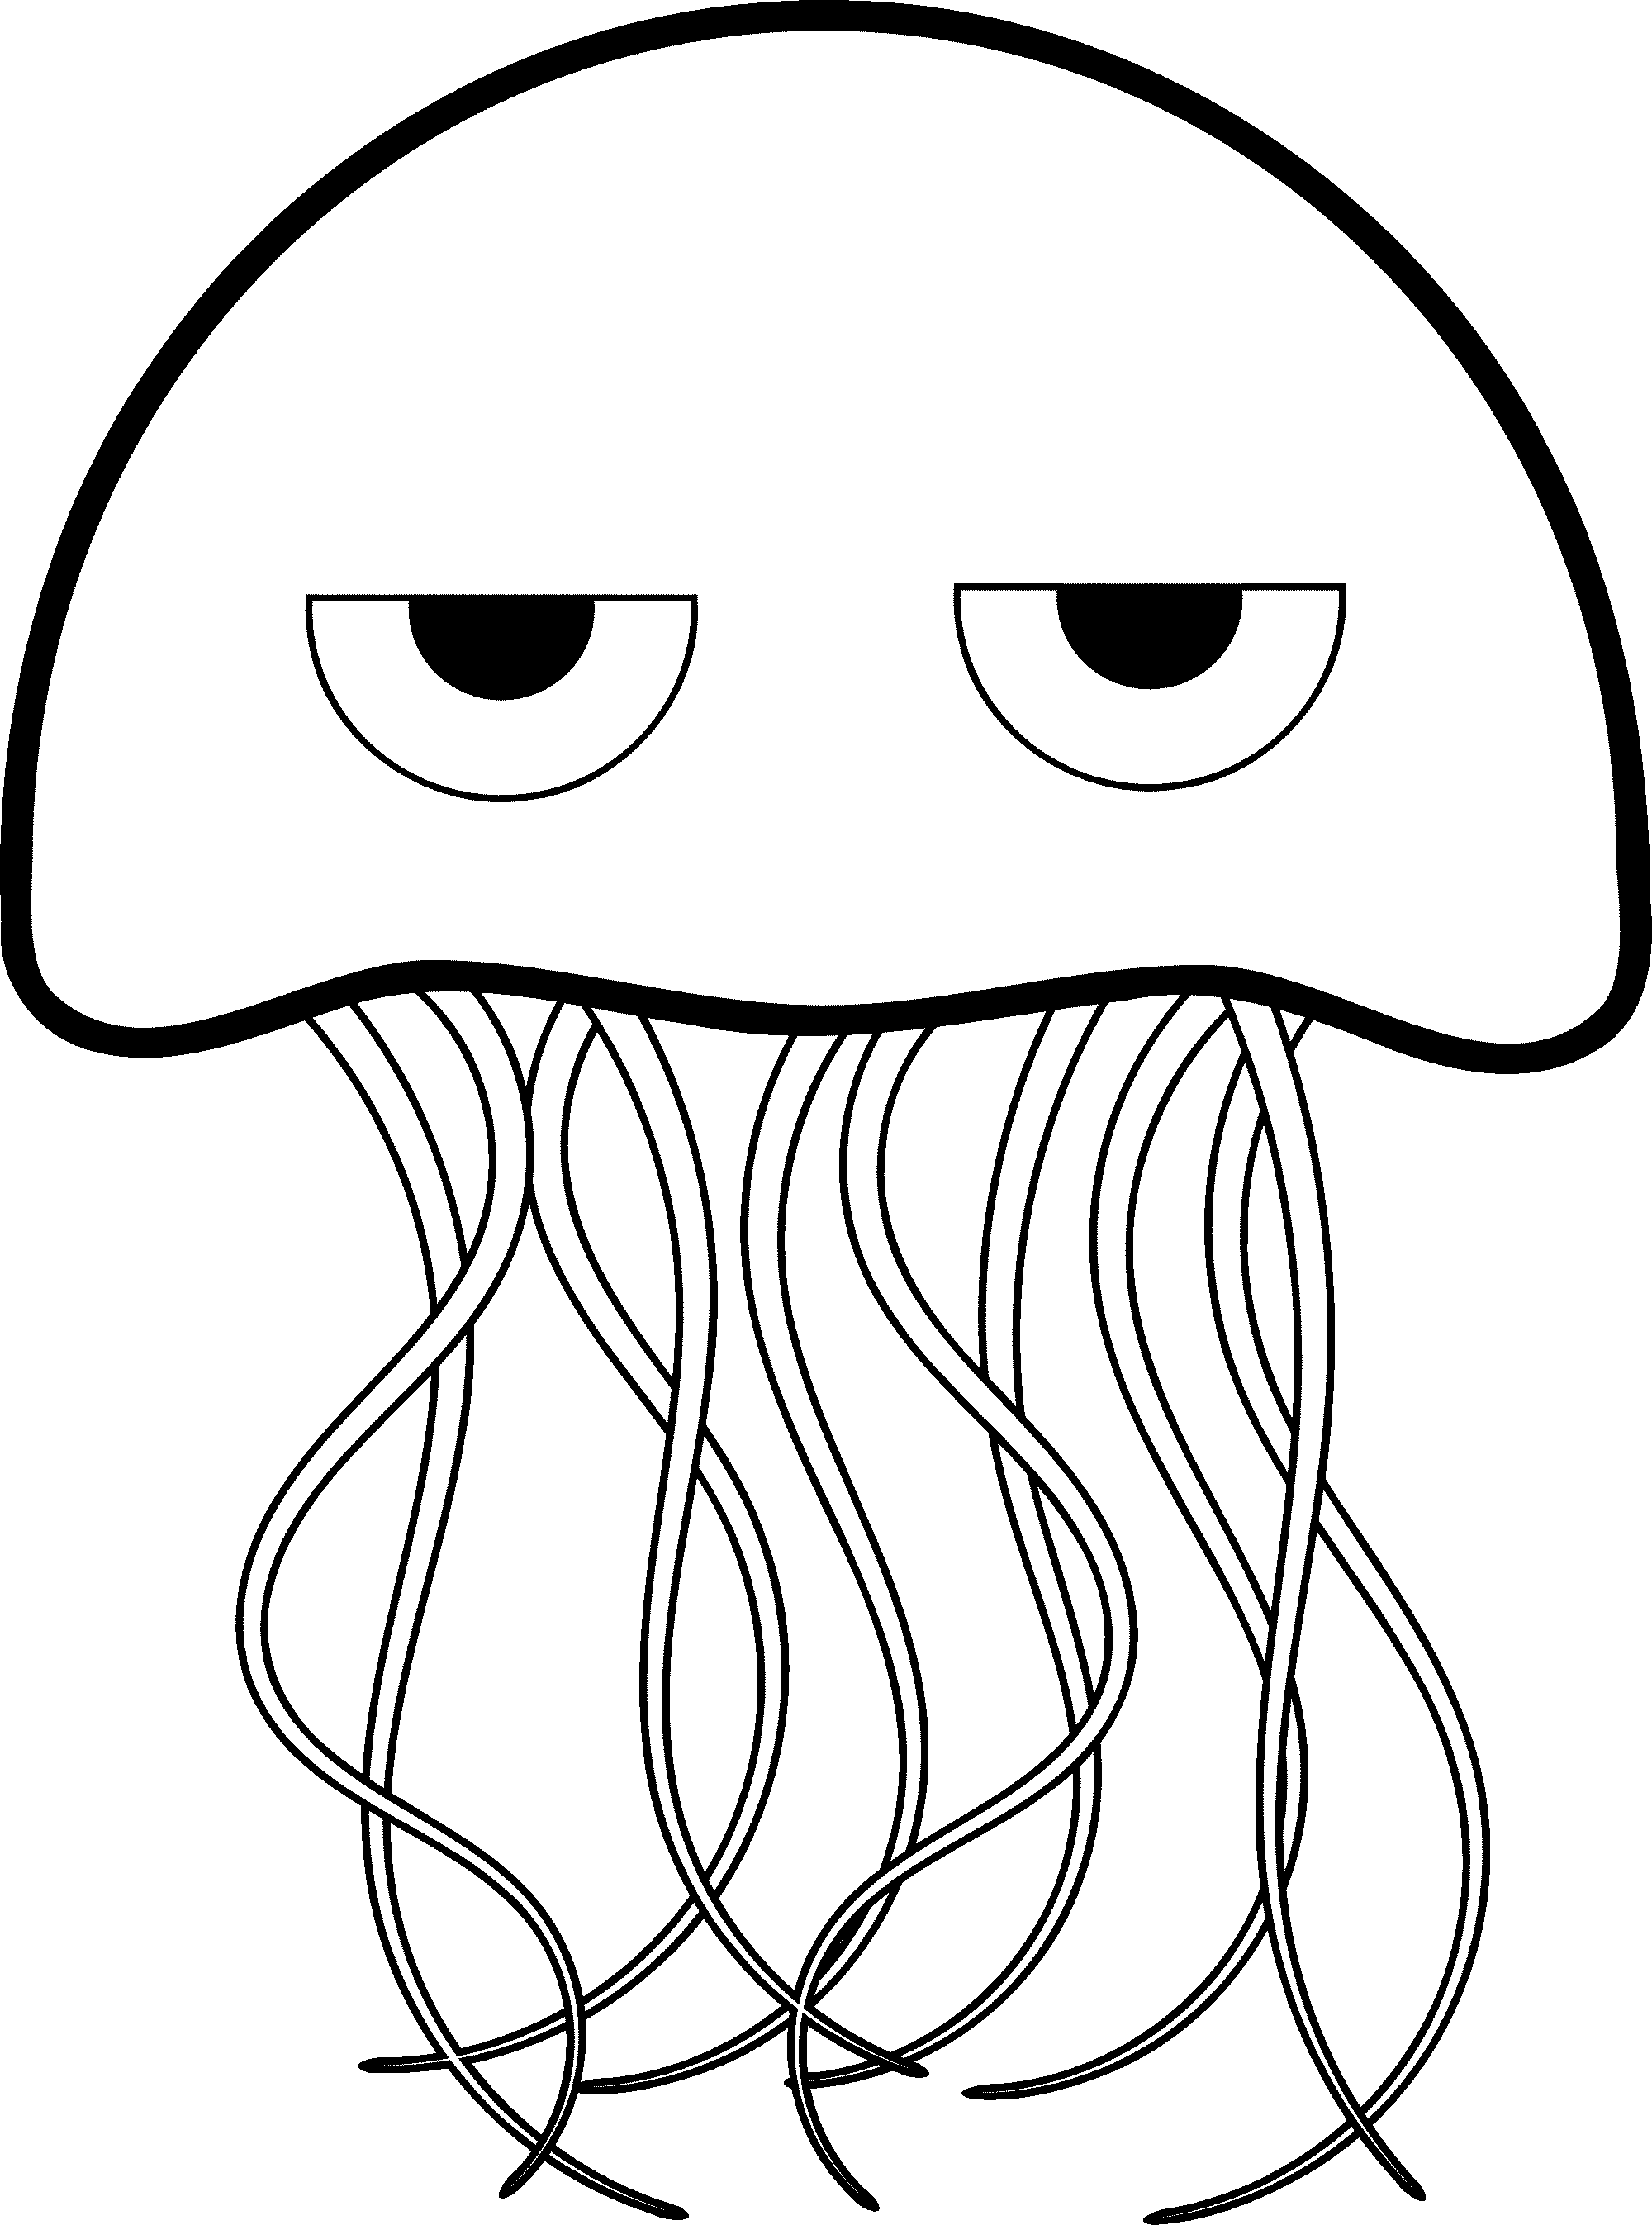 jelly fish coloring page     BestAppsForKids.com